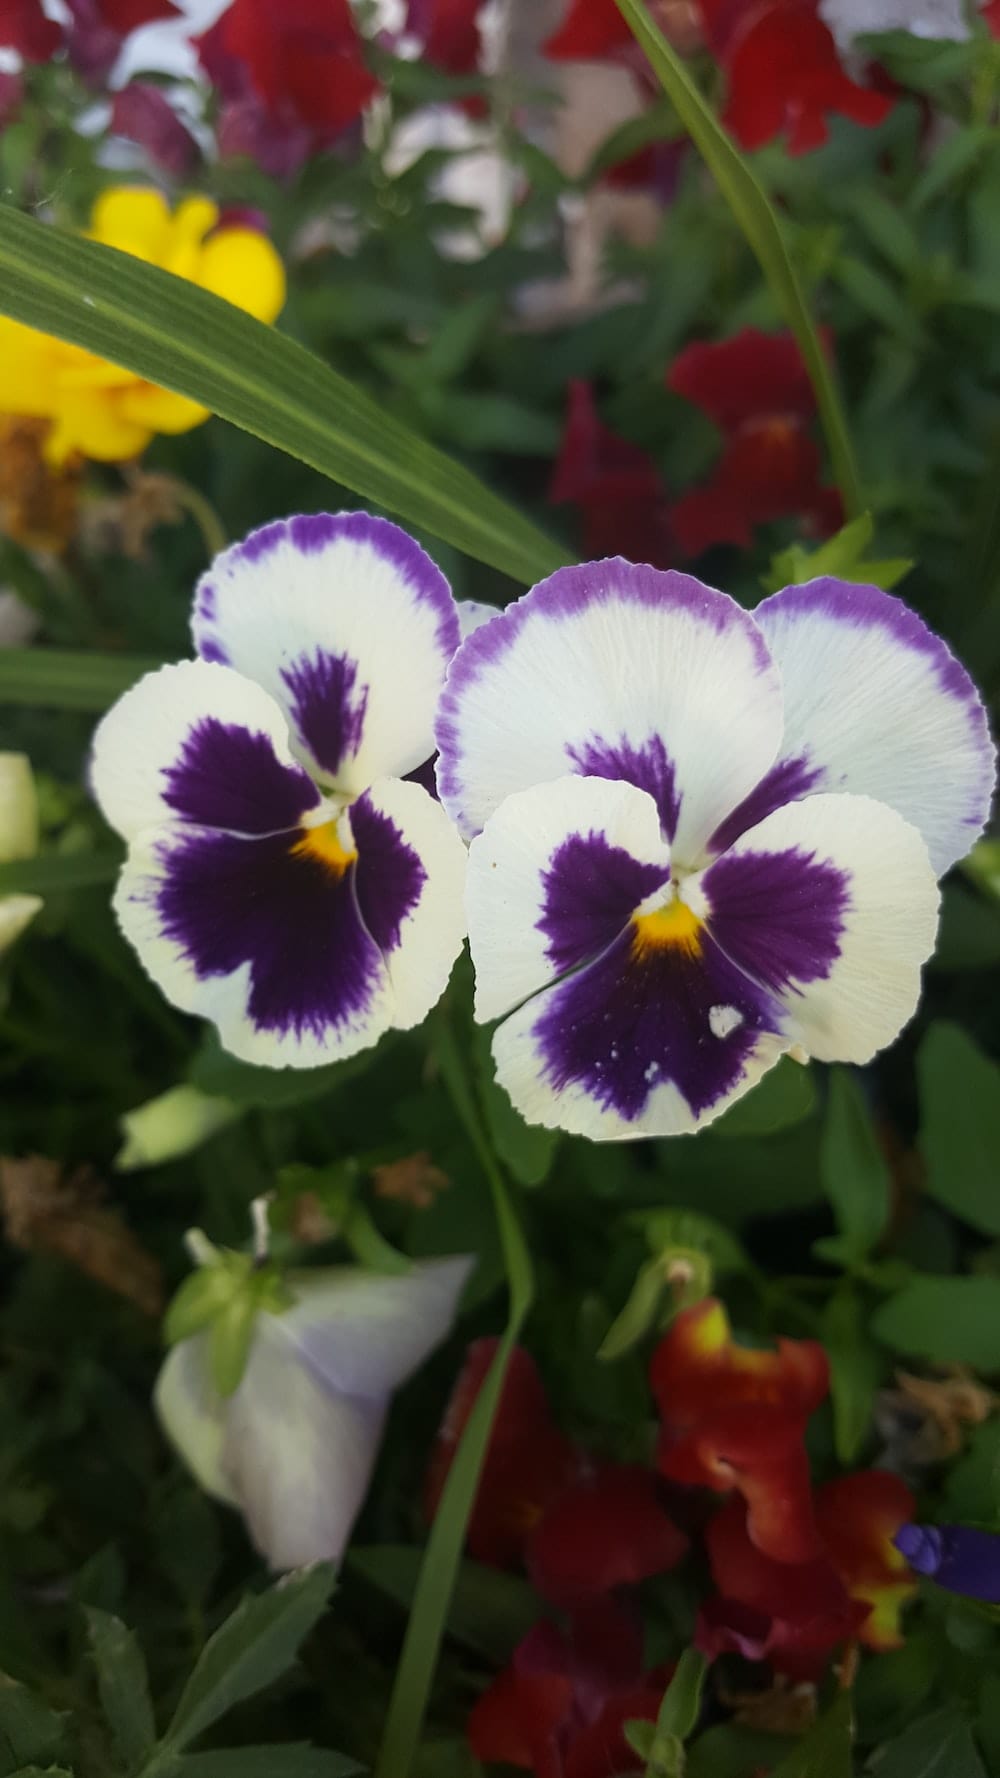 two pansies close up